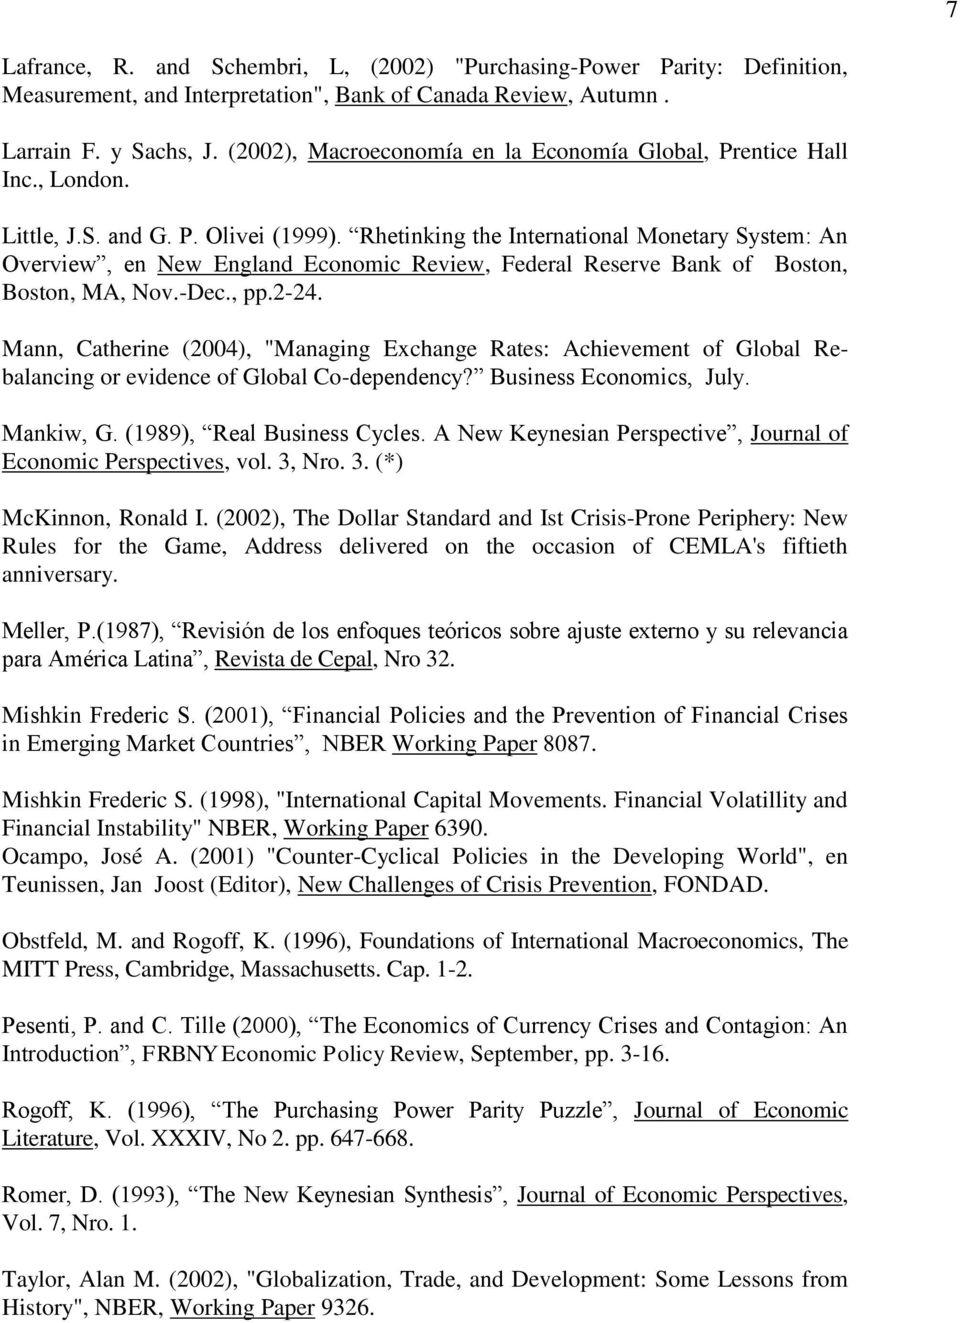 Rhetinking the International Monetary System: An Overview, en New England Economic Review, Federal Reserve Bank of Boston, Boston, MA, Nov.-Dec., pp.2-24.